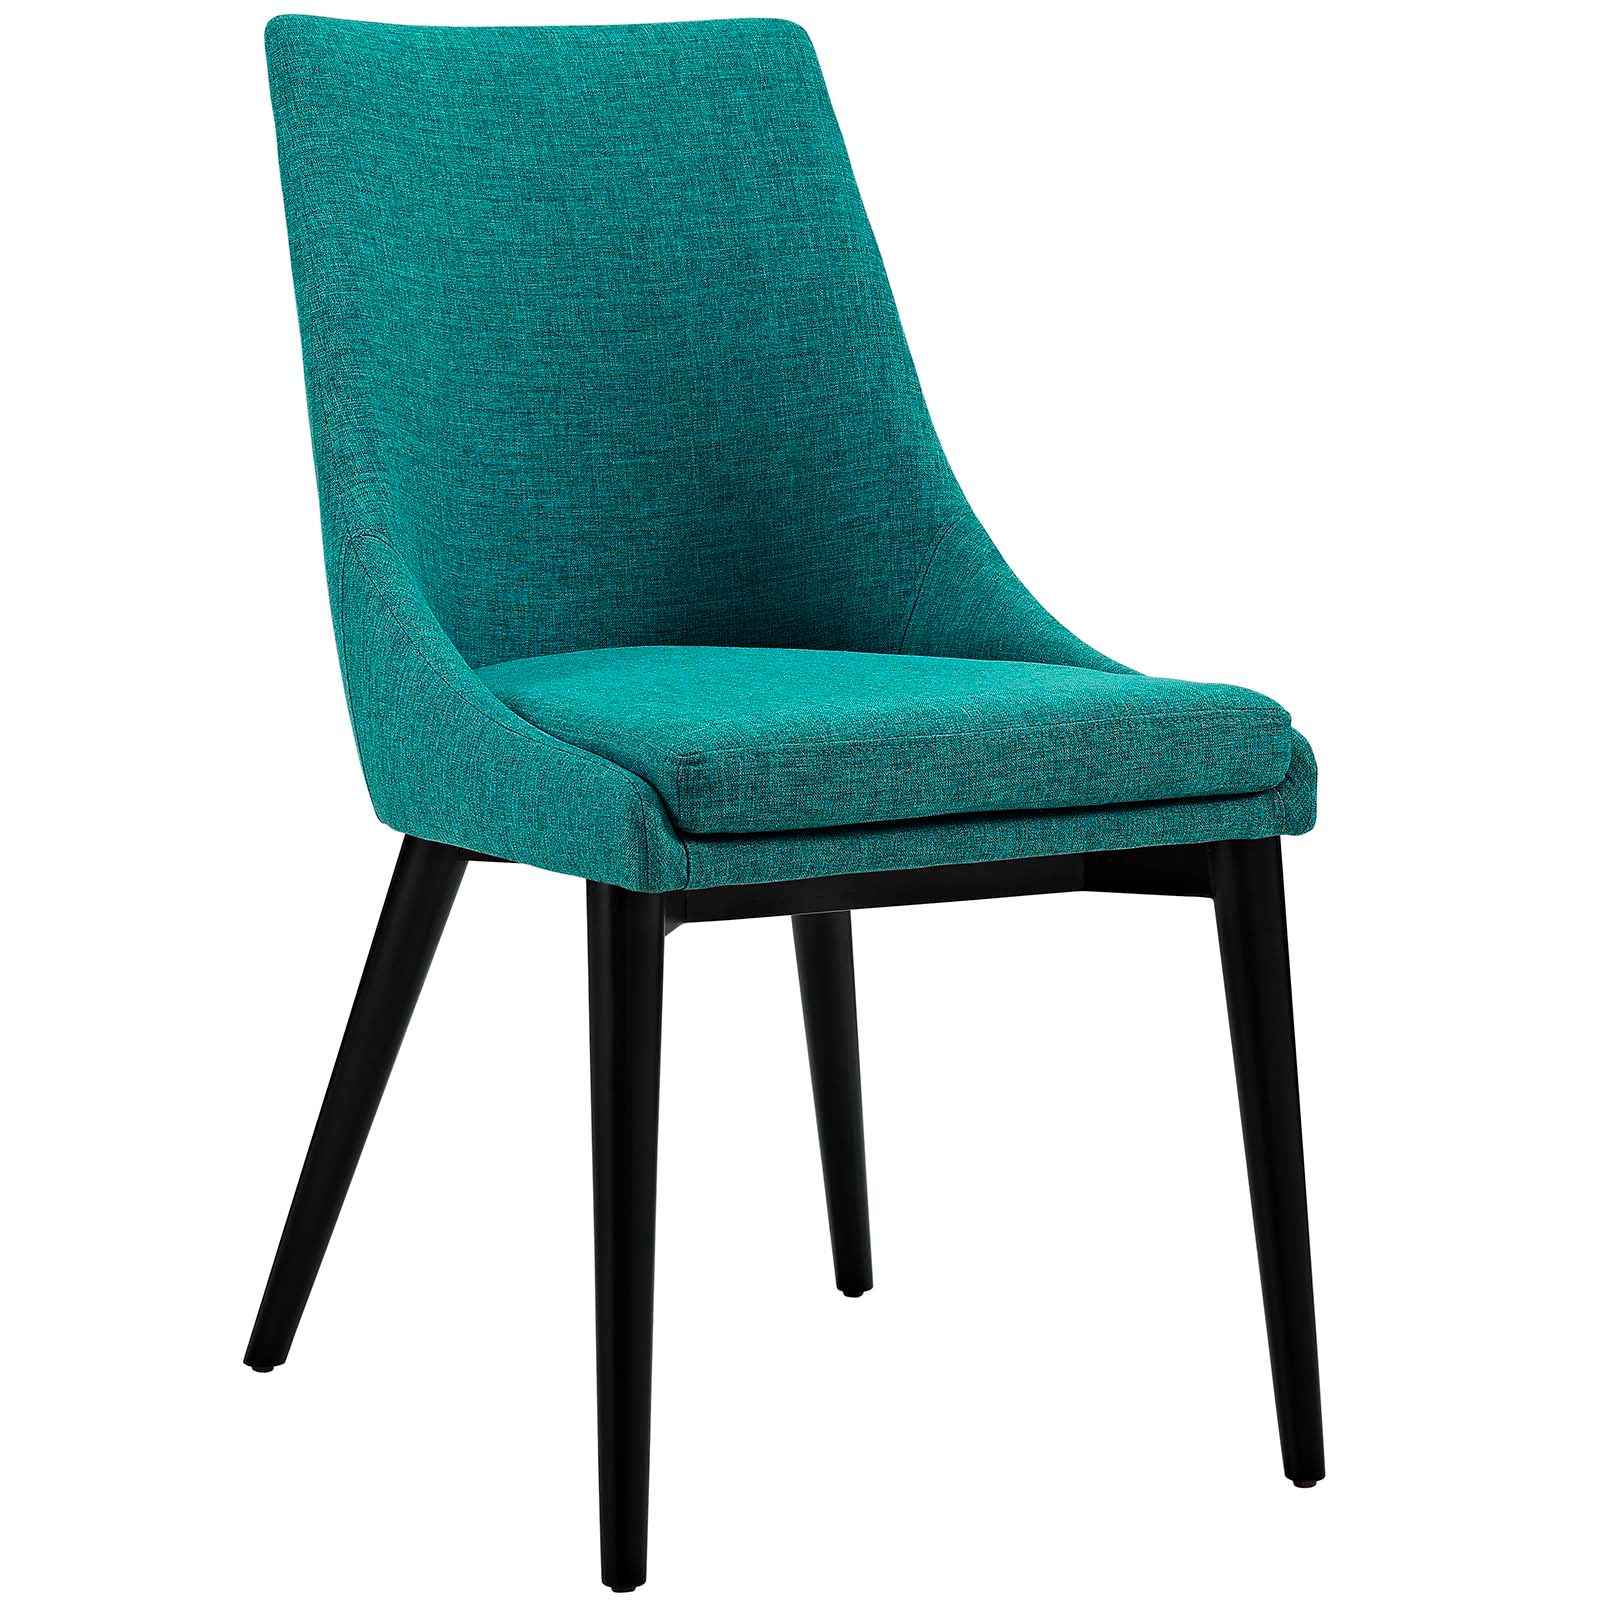 Modway Dining Chairs - Viscount Fabric Dining Chair Teal